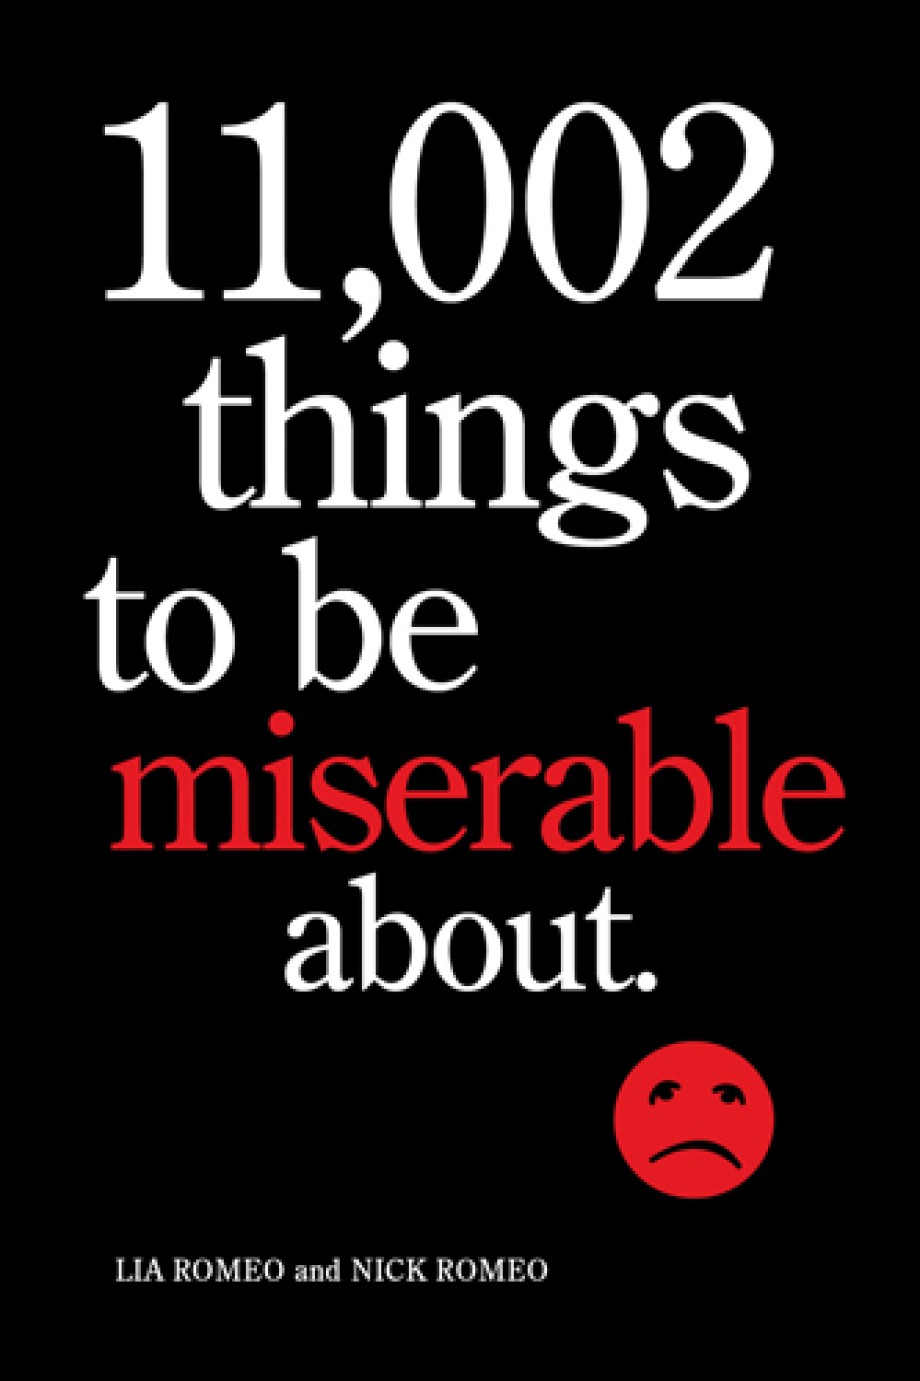 11,002 Things to Be Miserable About The Satirical Not-So-Happy Book